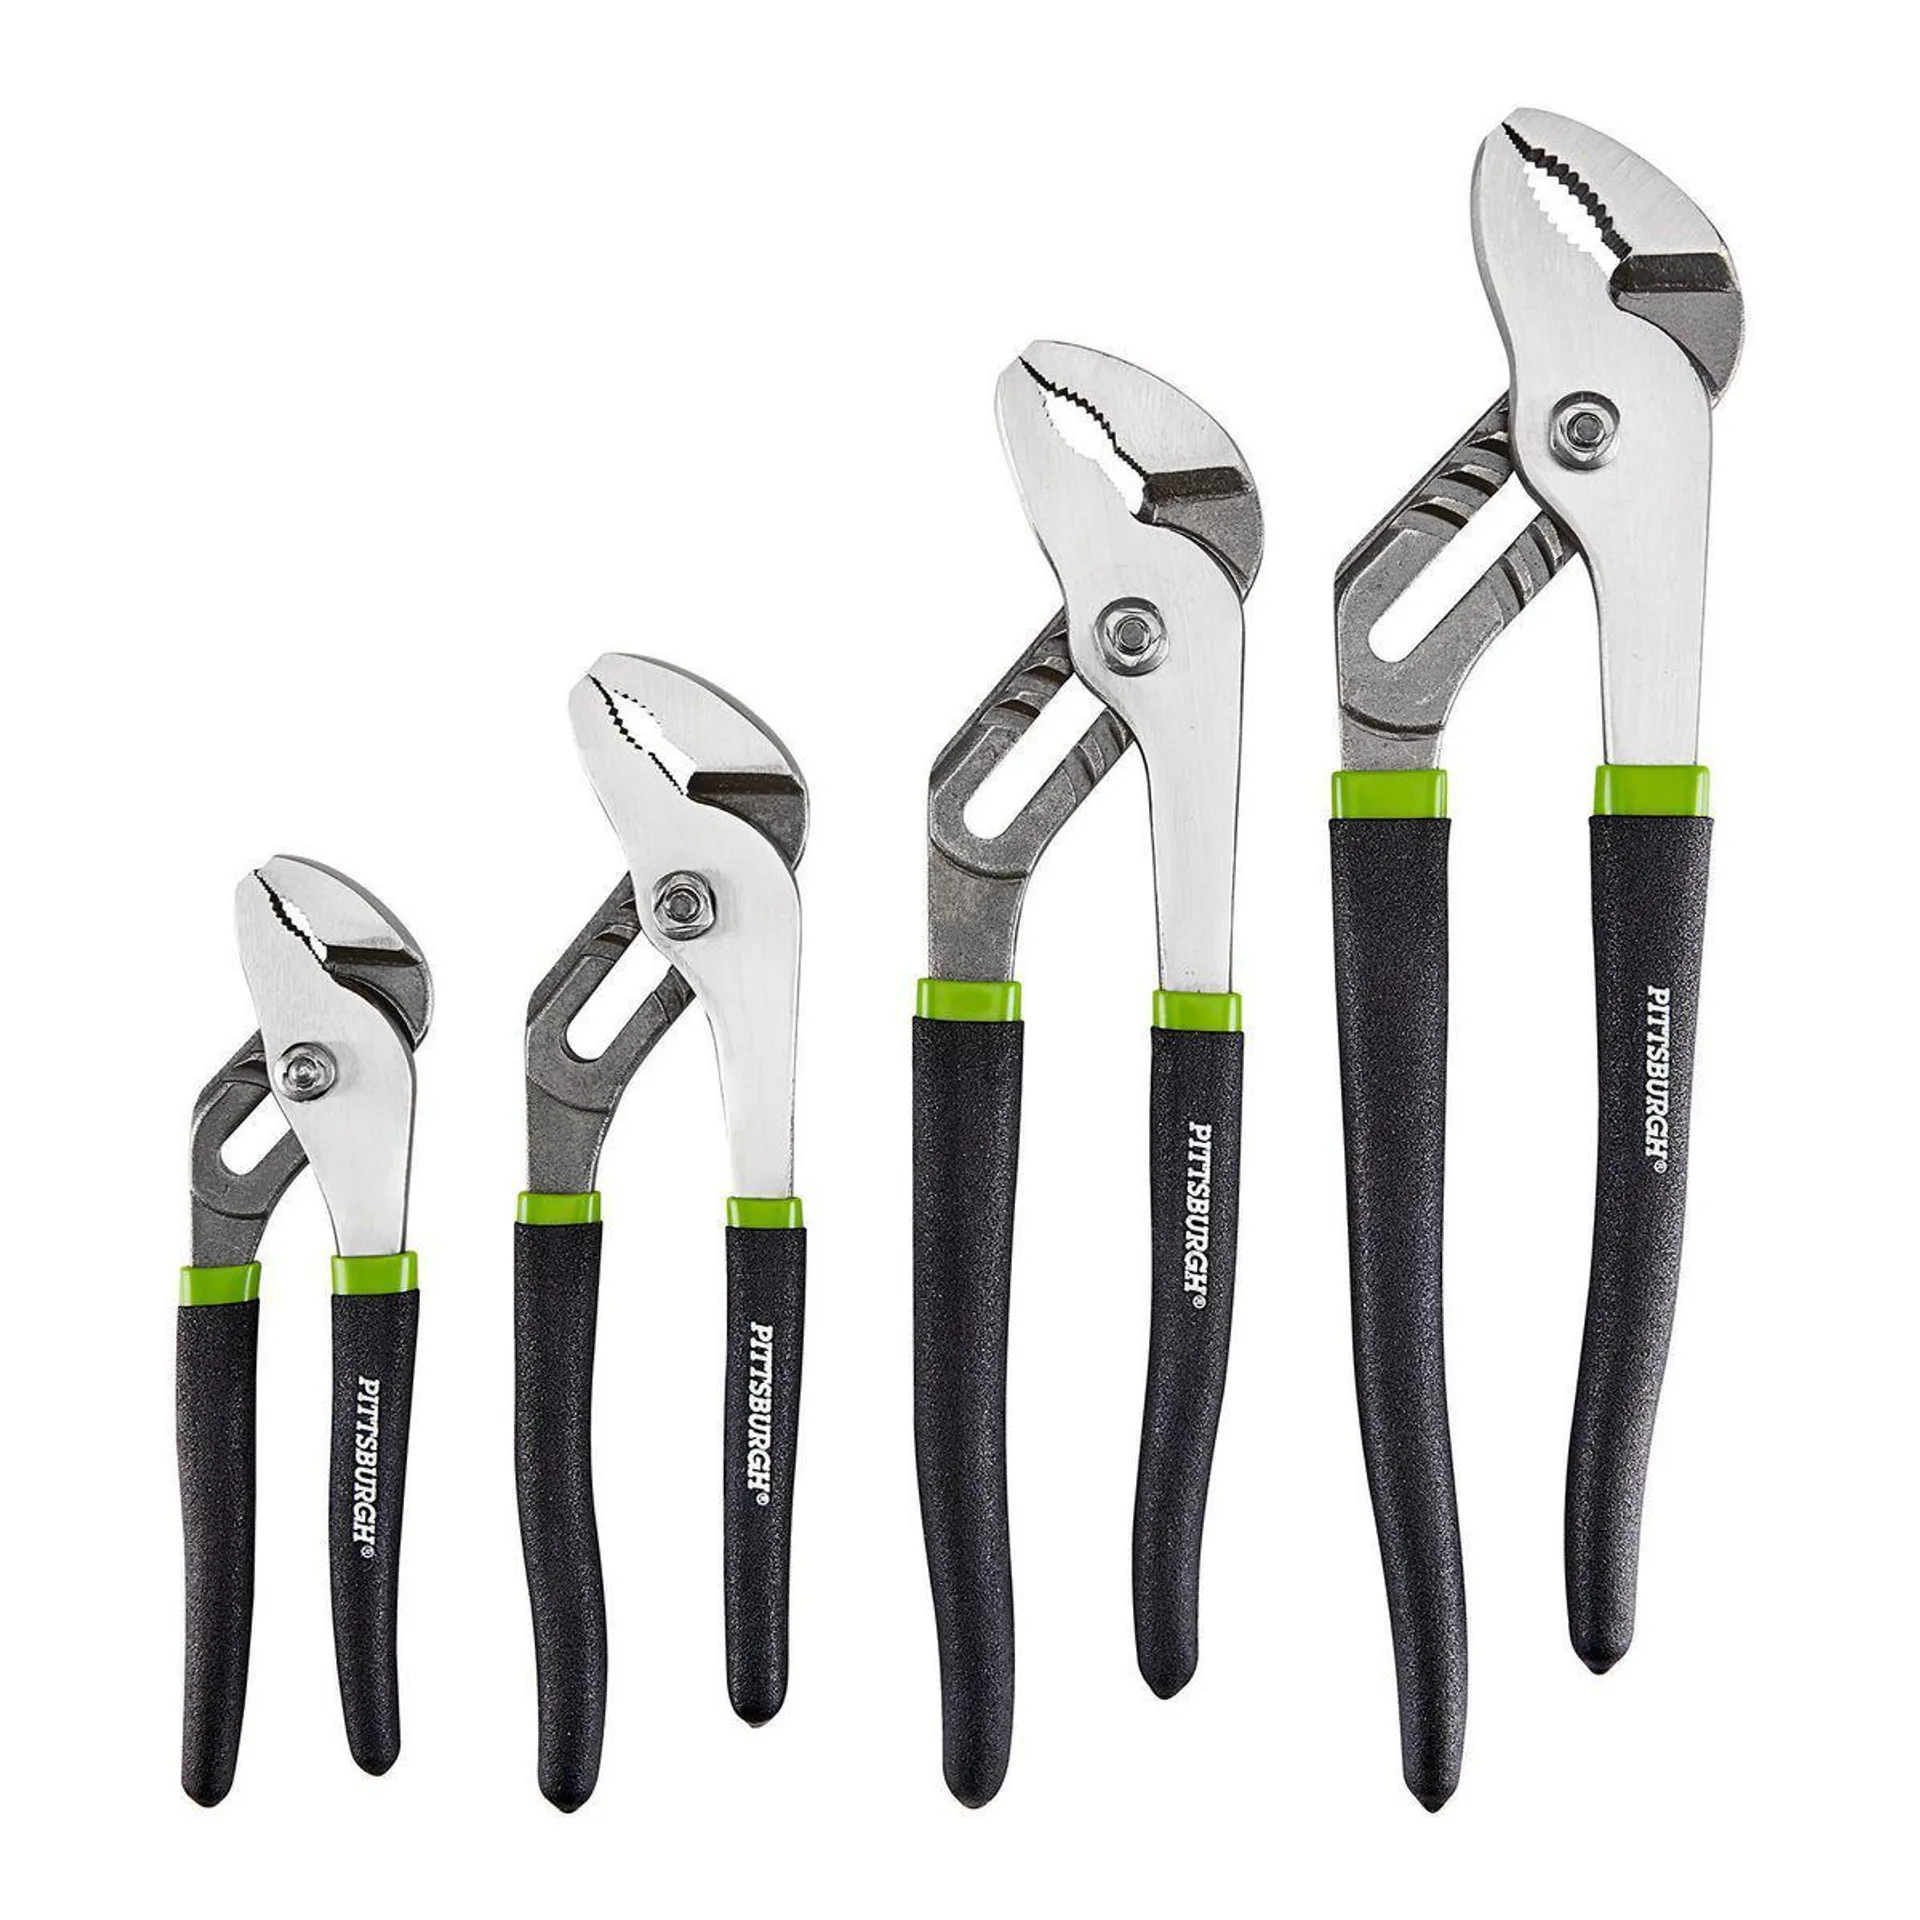 Tongue and Groove Joint Pliers Set, 4 Piece